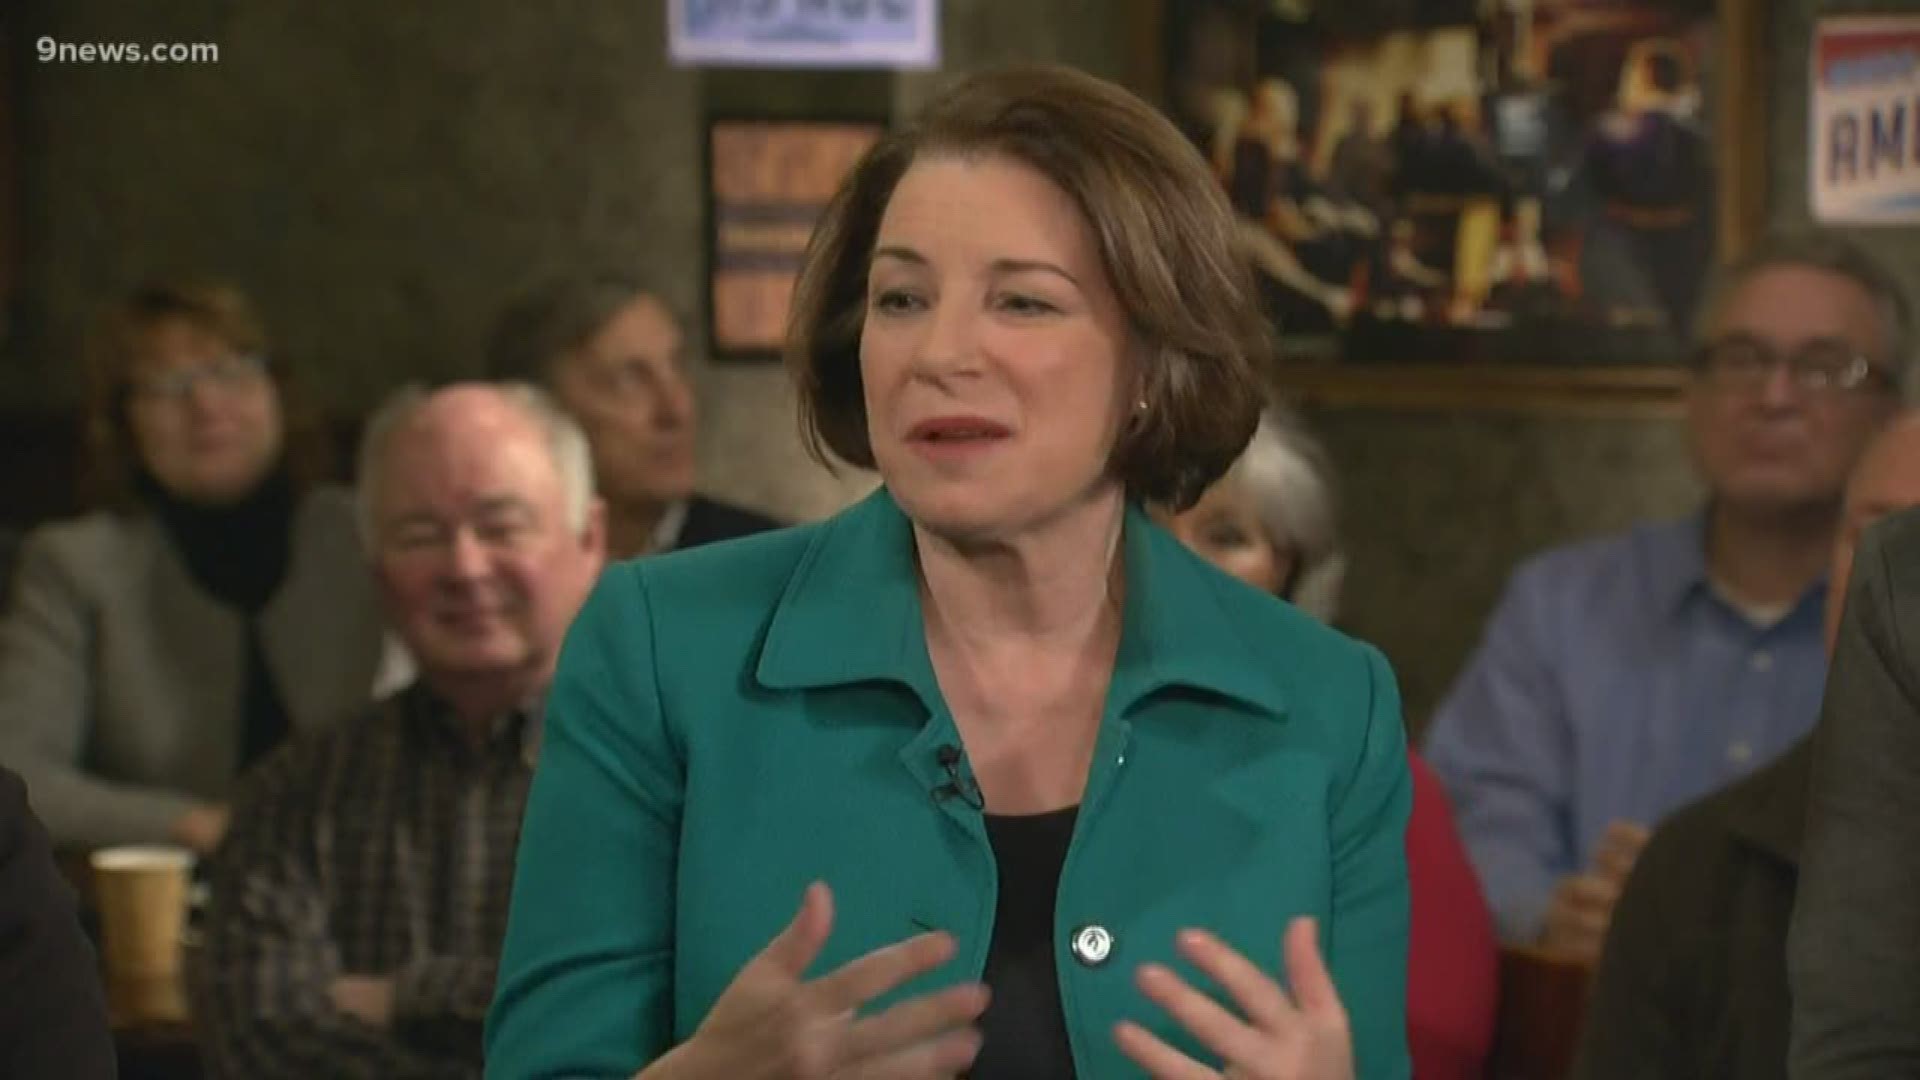 After polling third in the New Hampshire primary, Klobuchar will campaign in Denver Thursday evening in preparation for Super Tuesday.